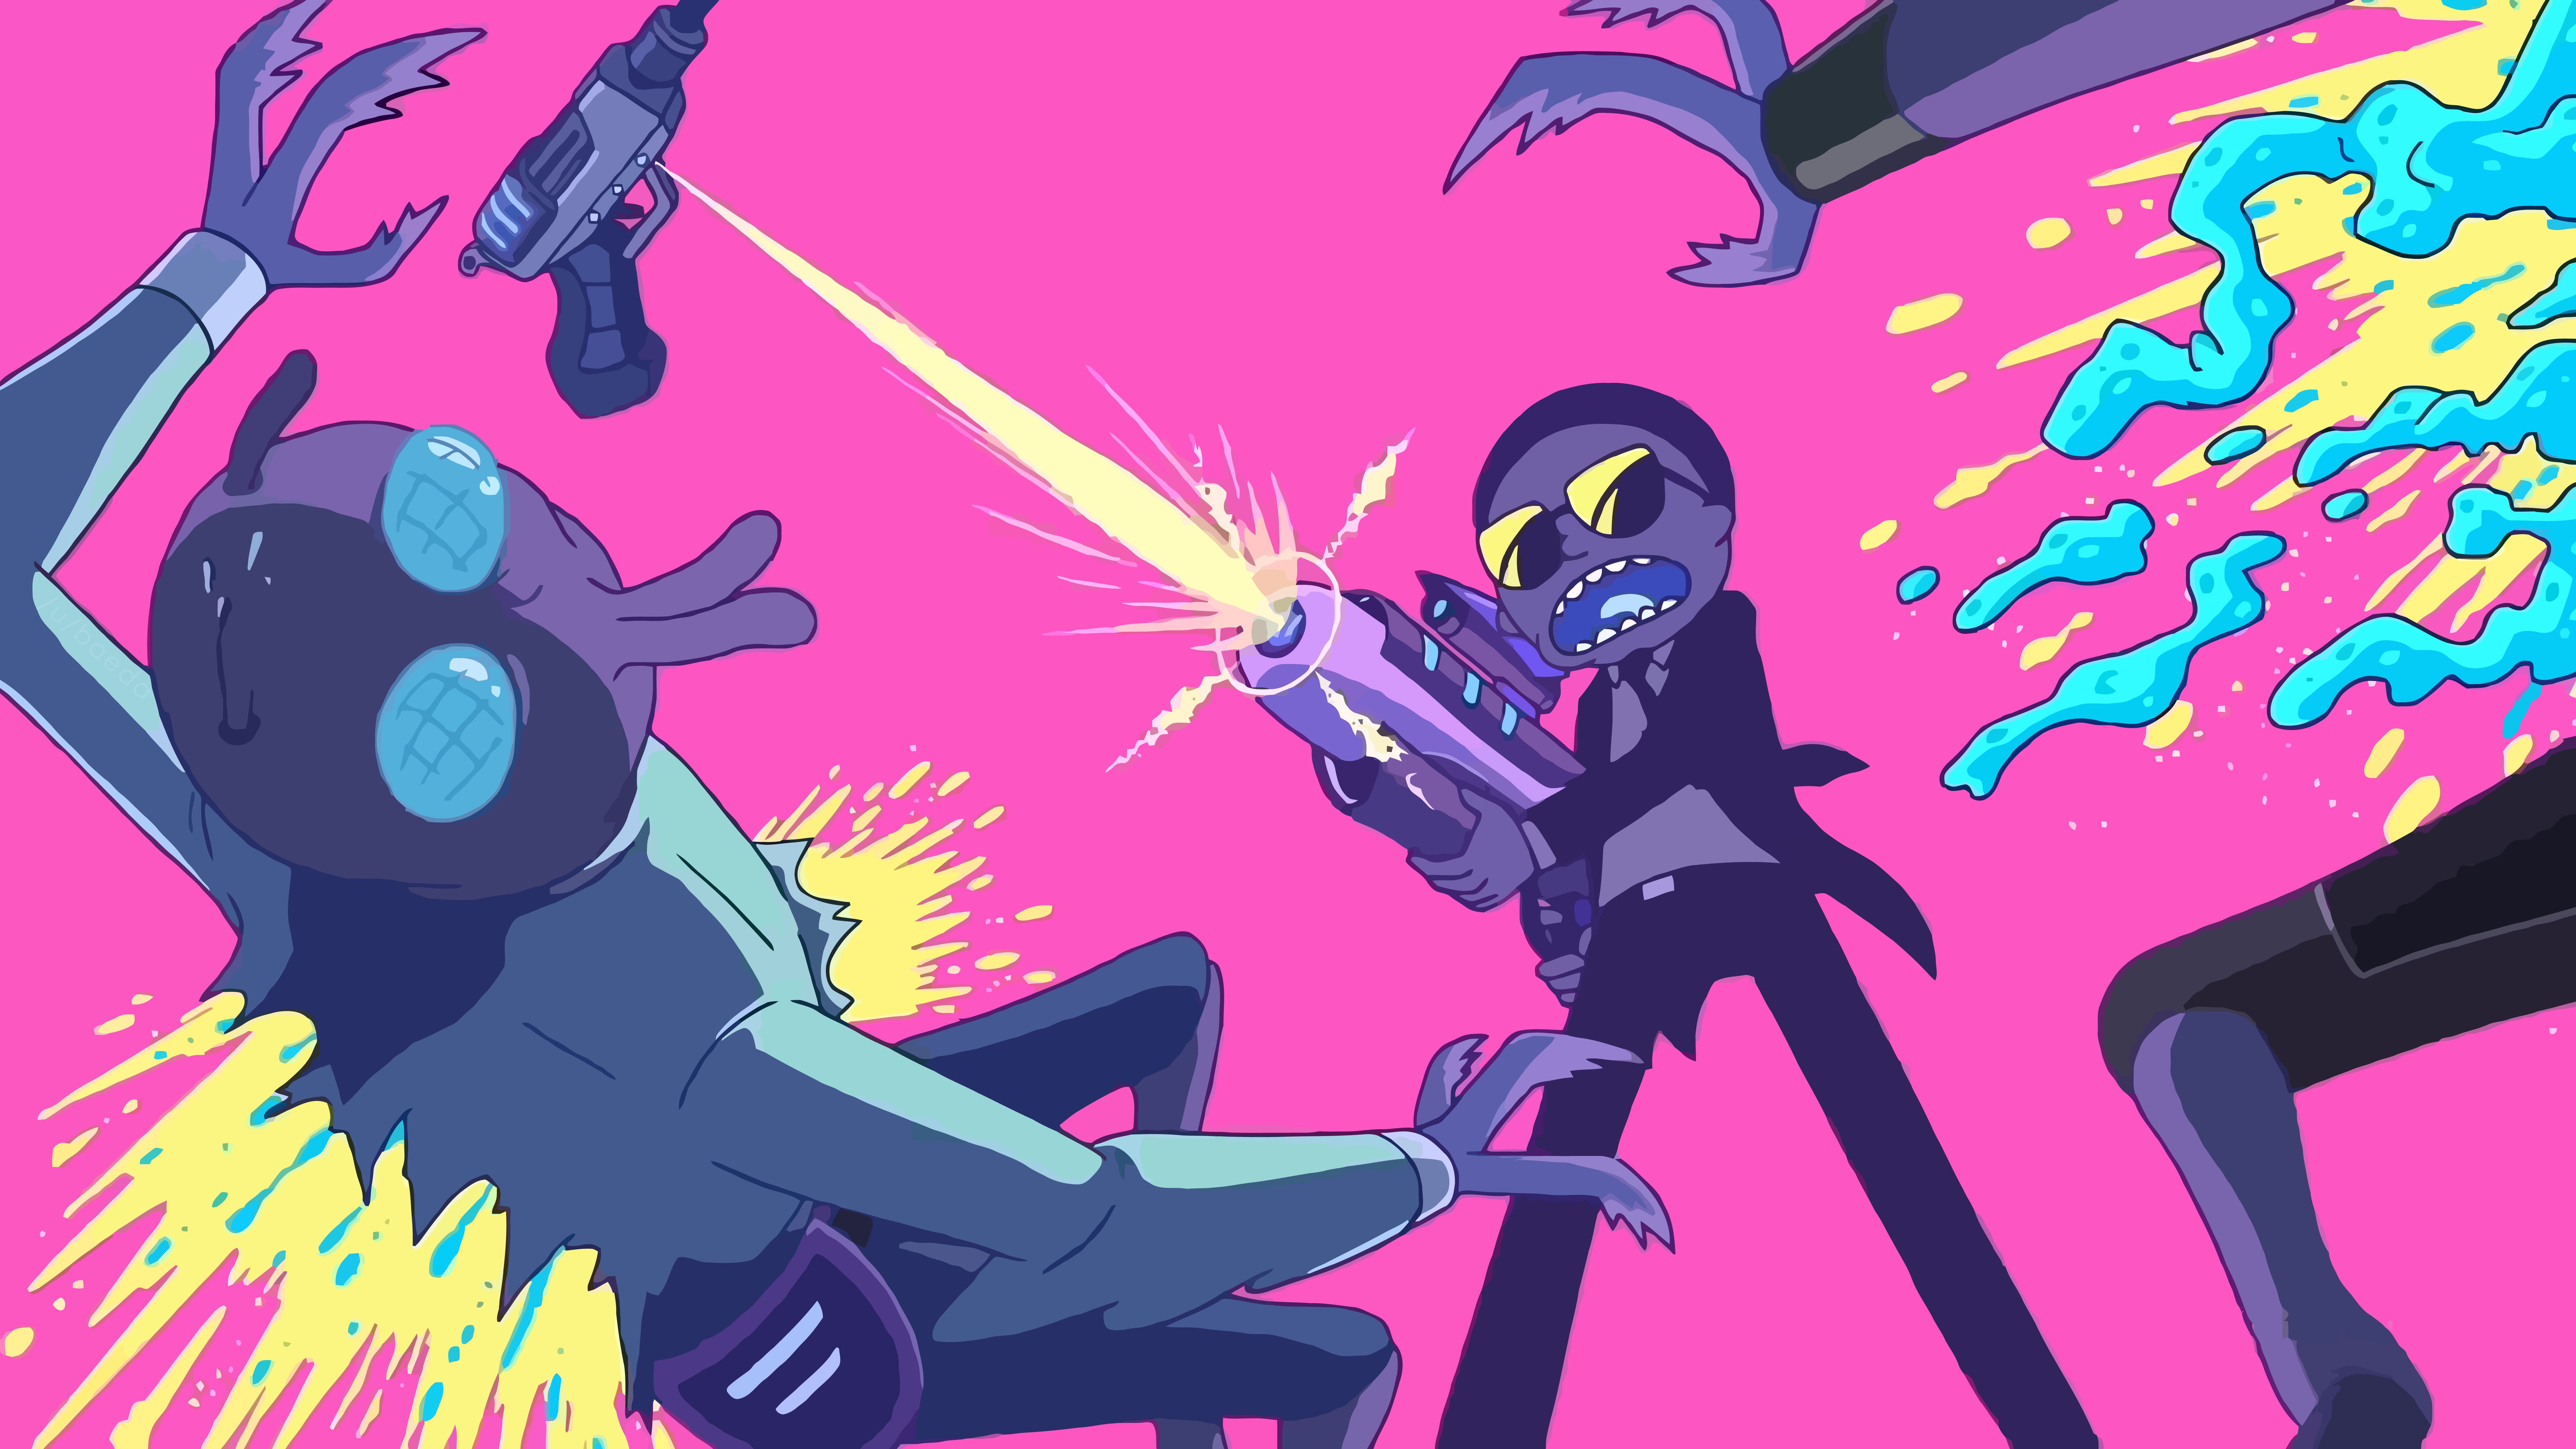 desktop Images rick and morty, tv show, morty smith, run the jewels